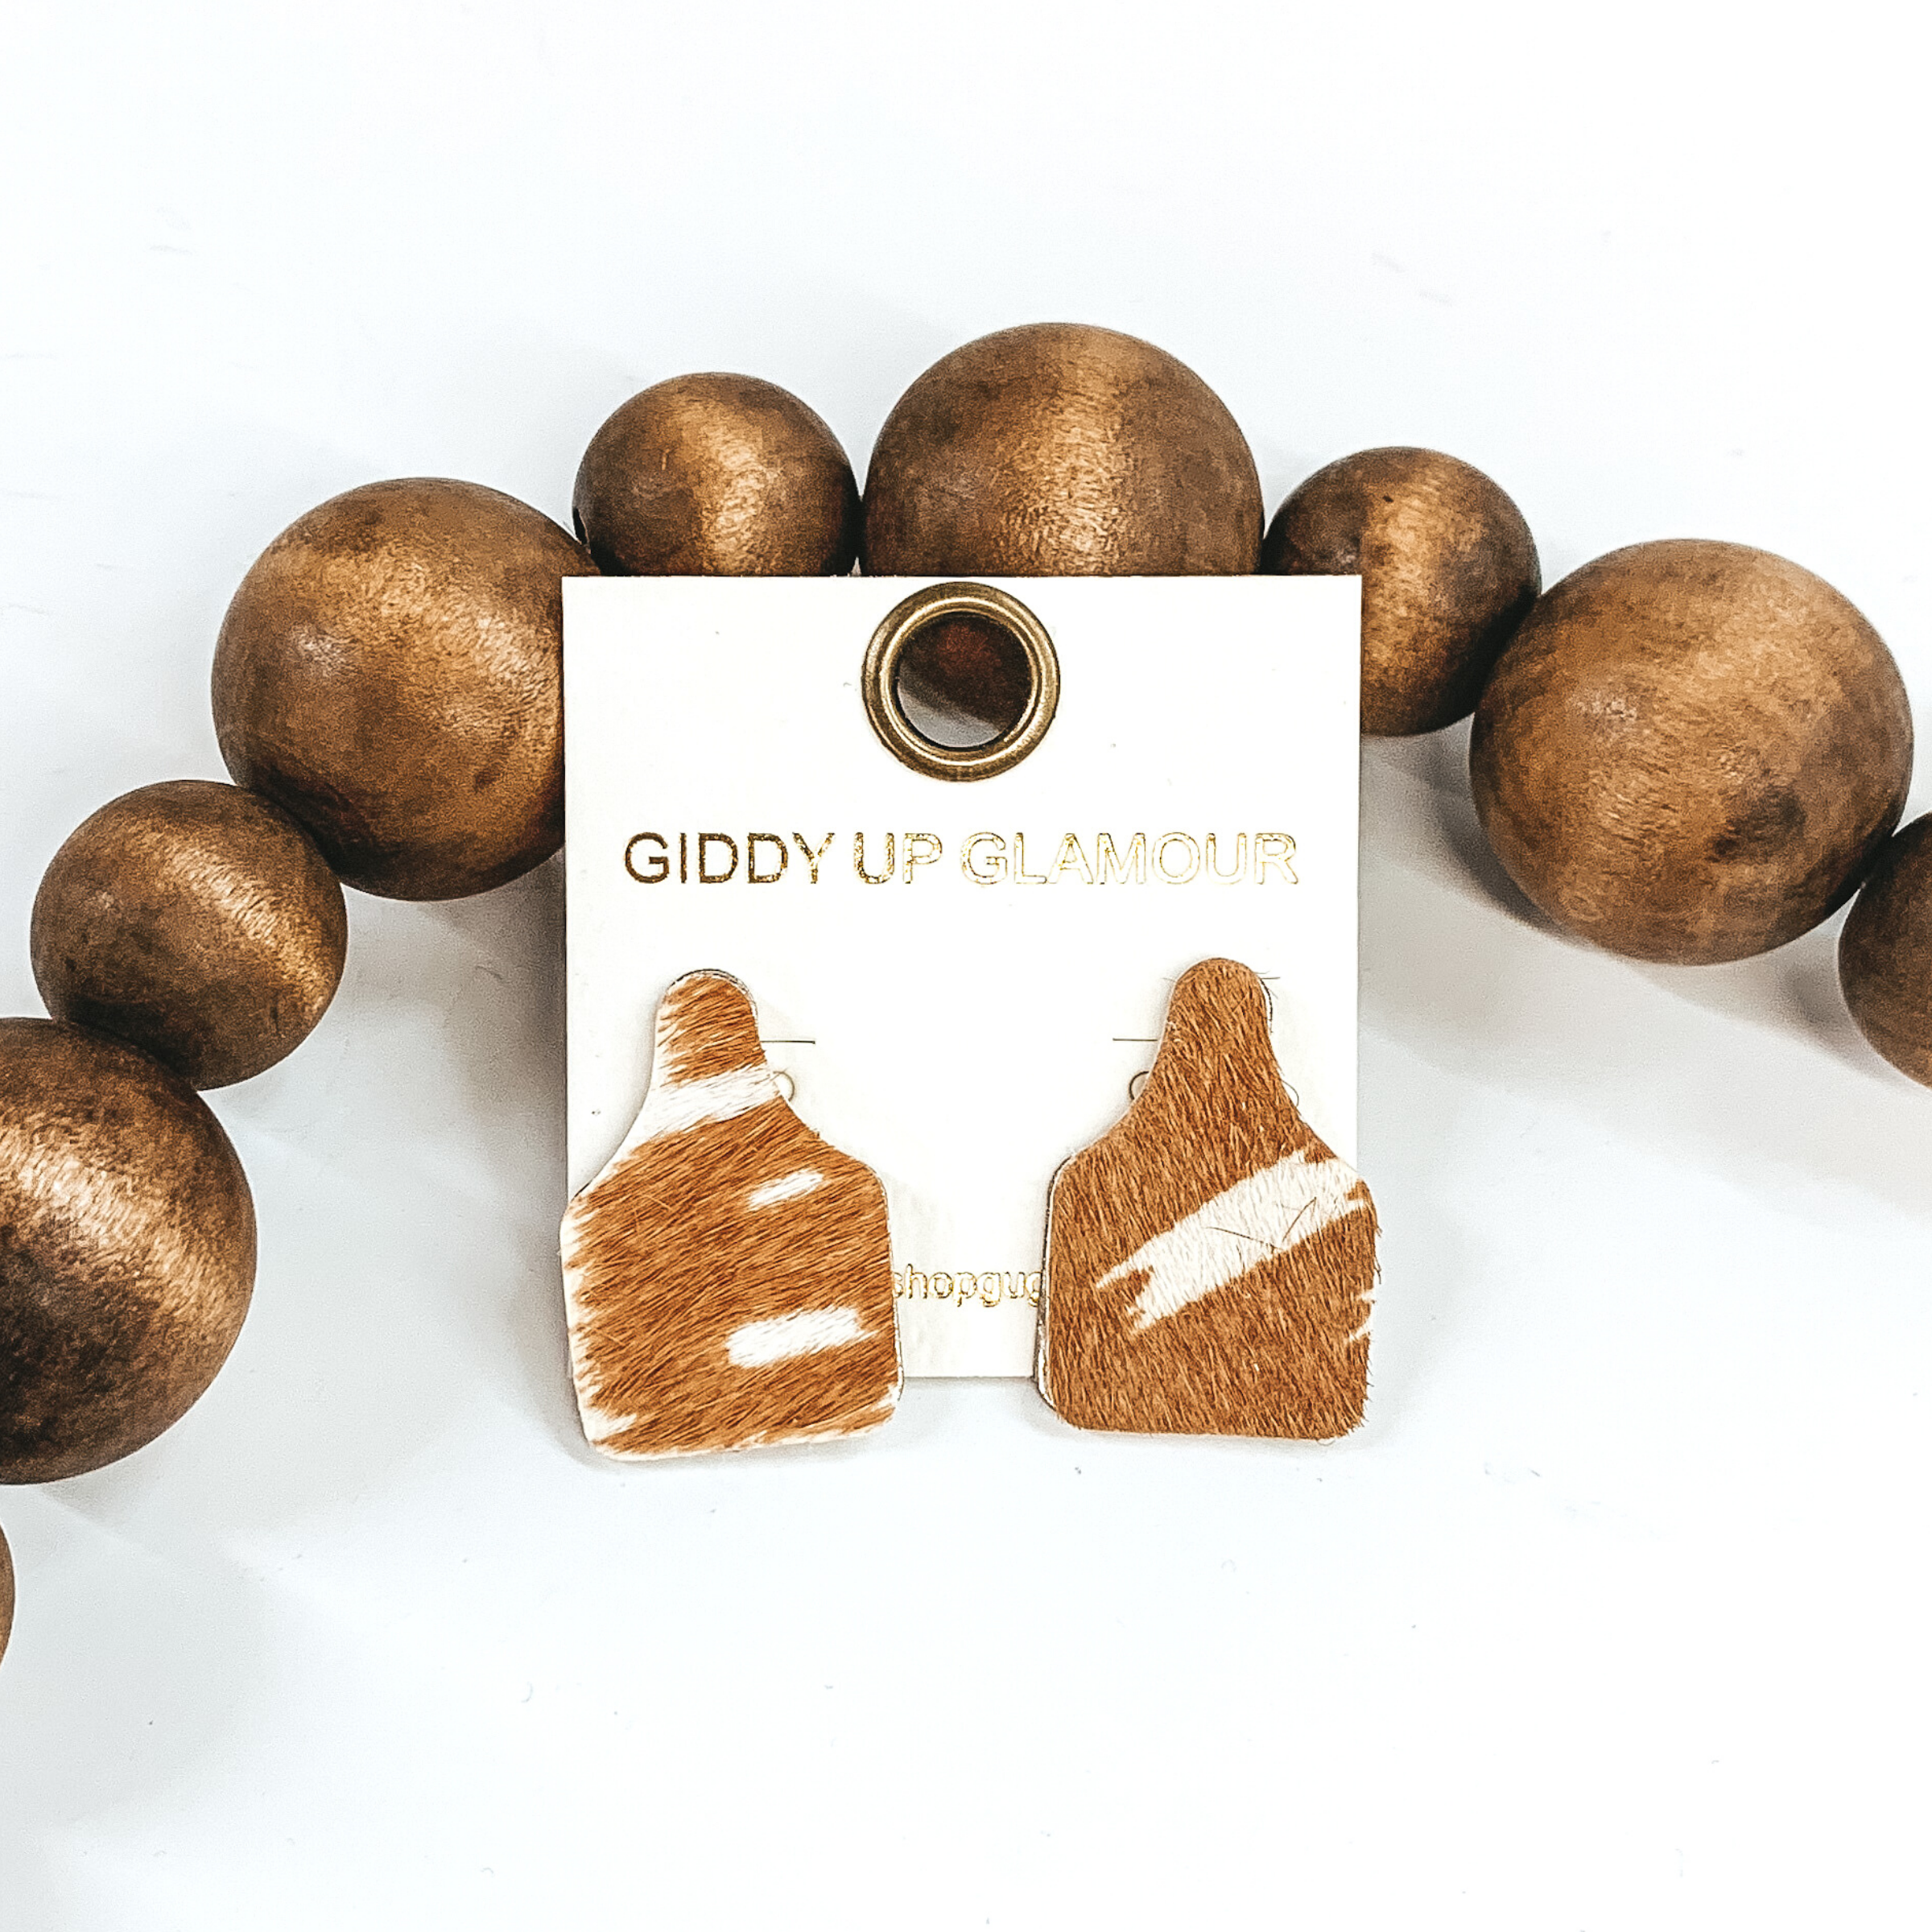 Cattle tag stud earrings with a hair on hide material. It has a cow print in colors tan and white. These earrings are pictured in front of dark brown beads on a white background. 